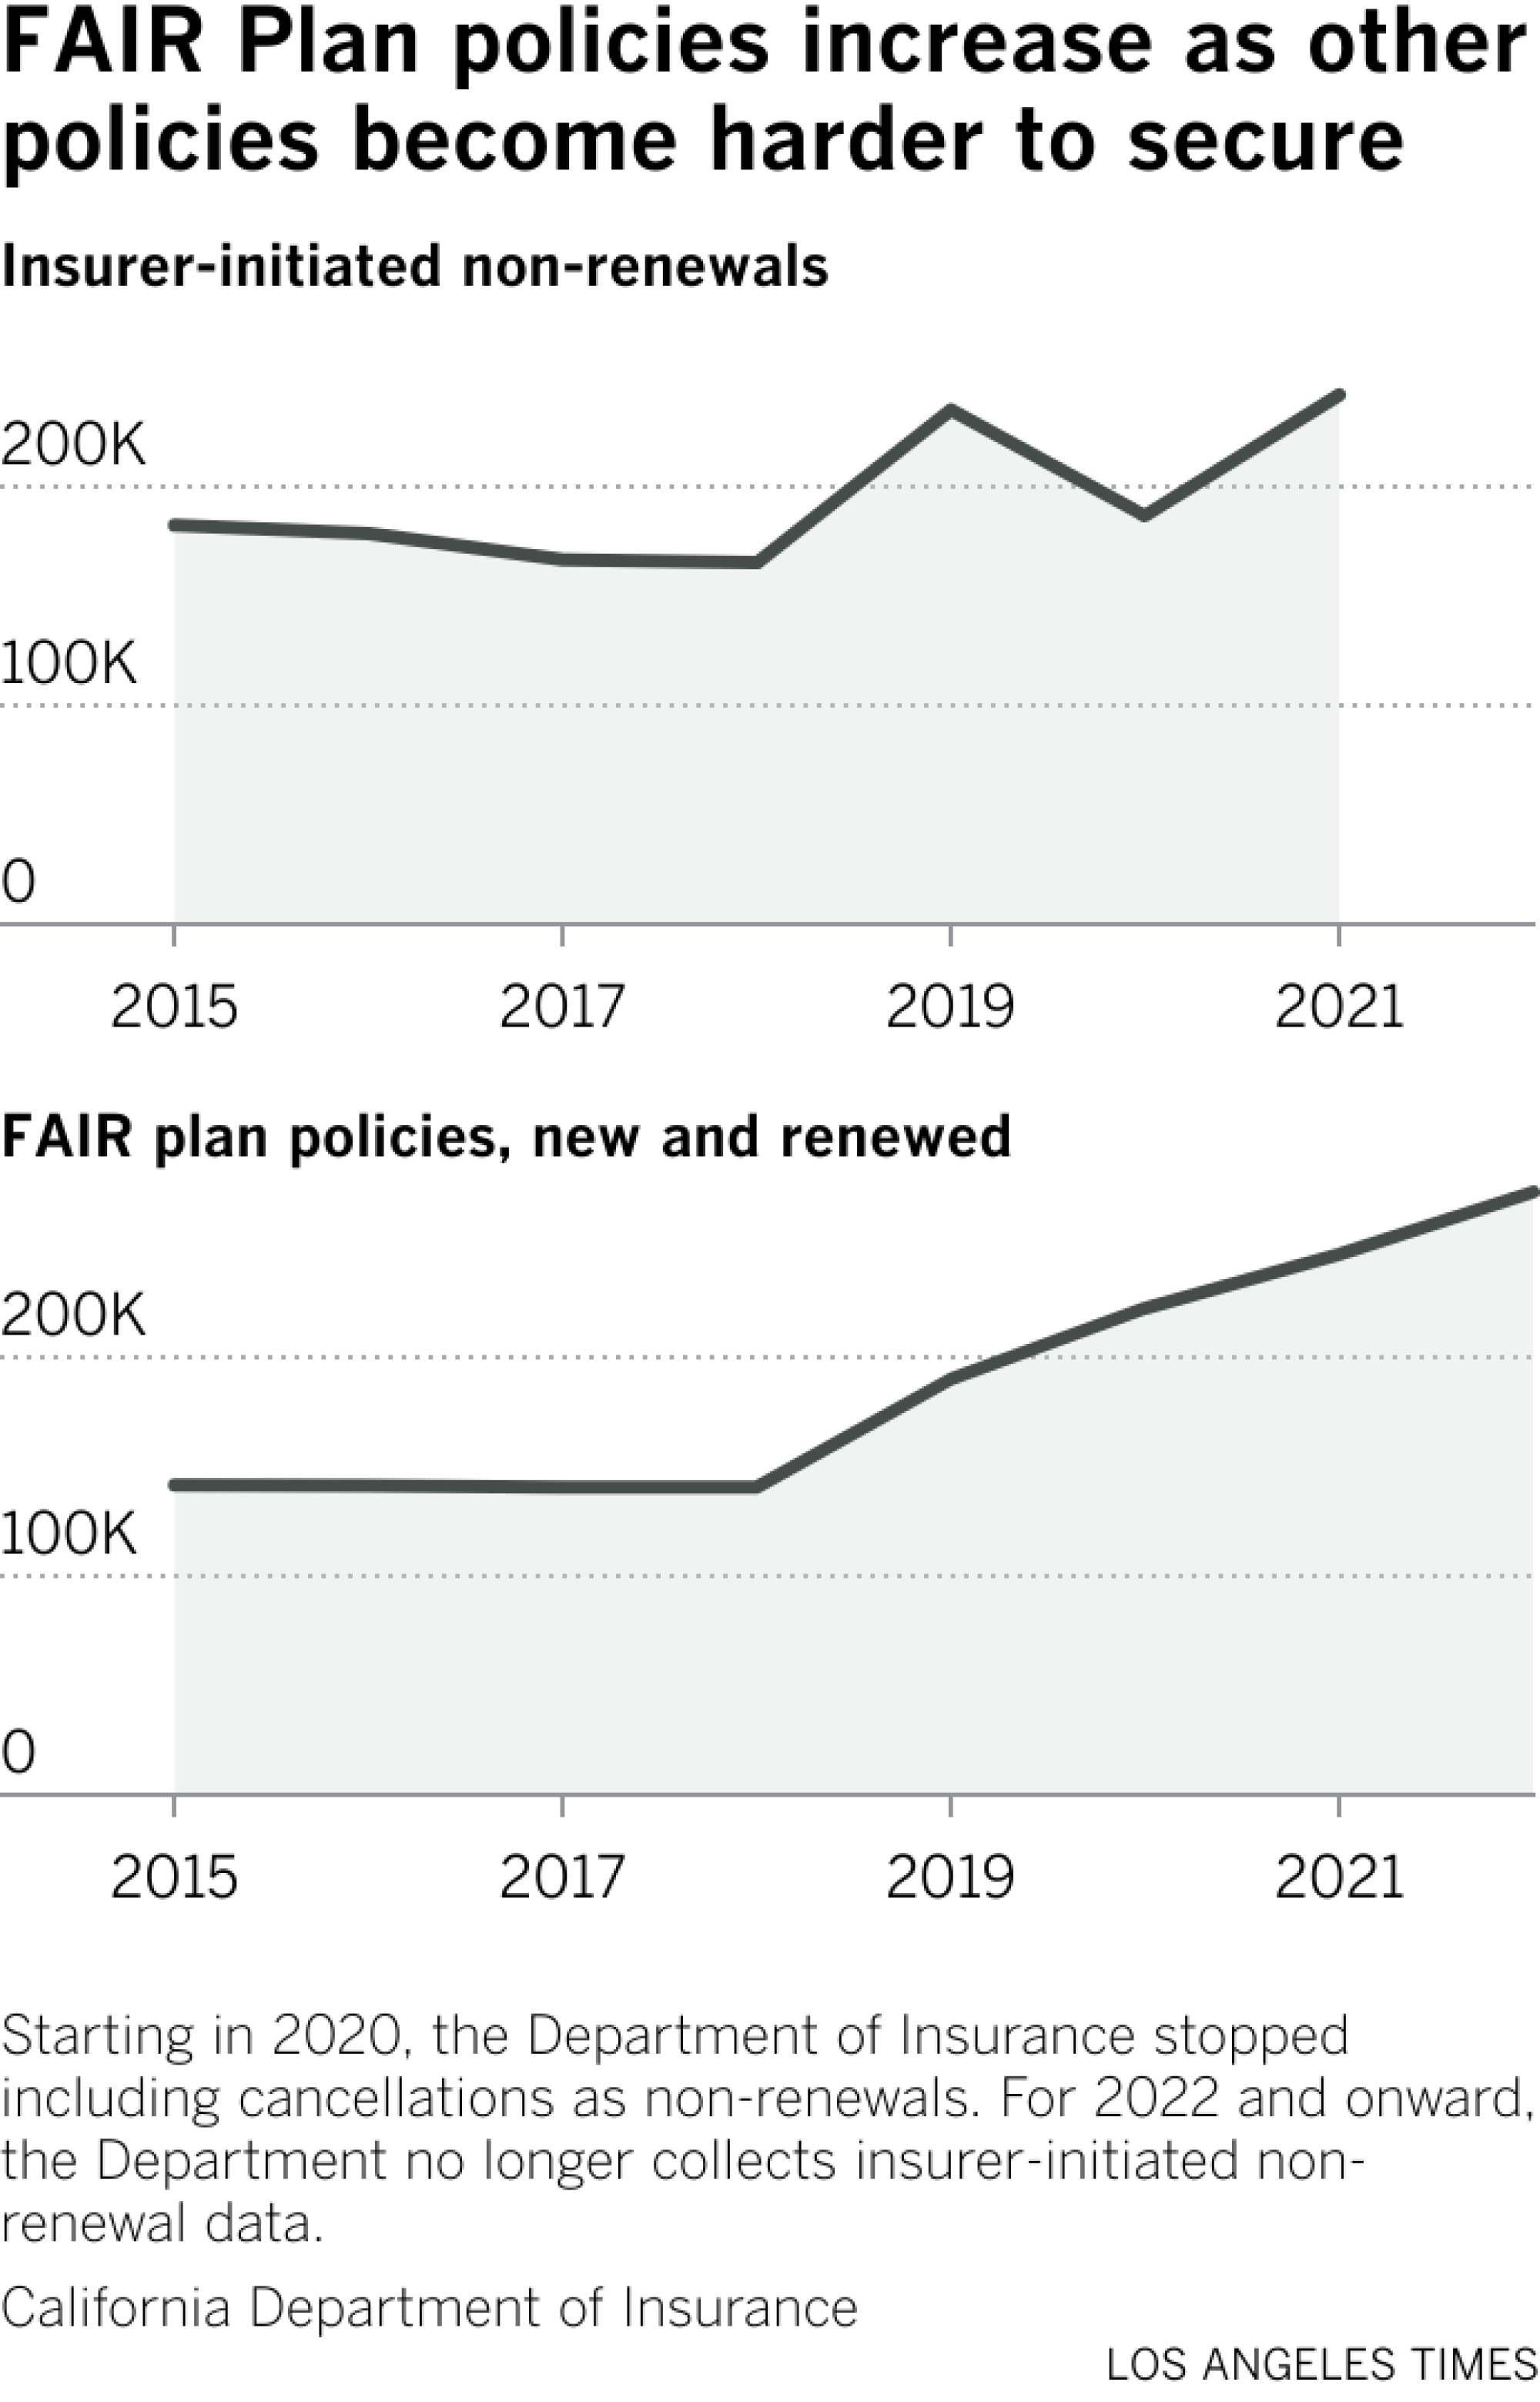 FAIR Plan policies increase as other policies become harder to secure